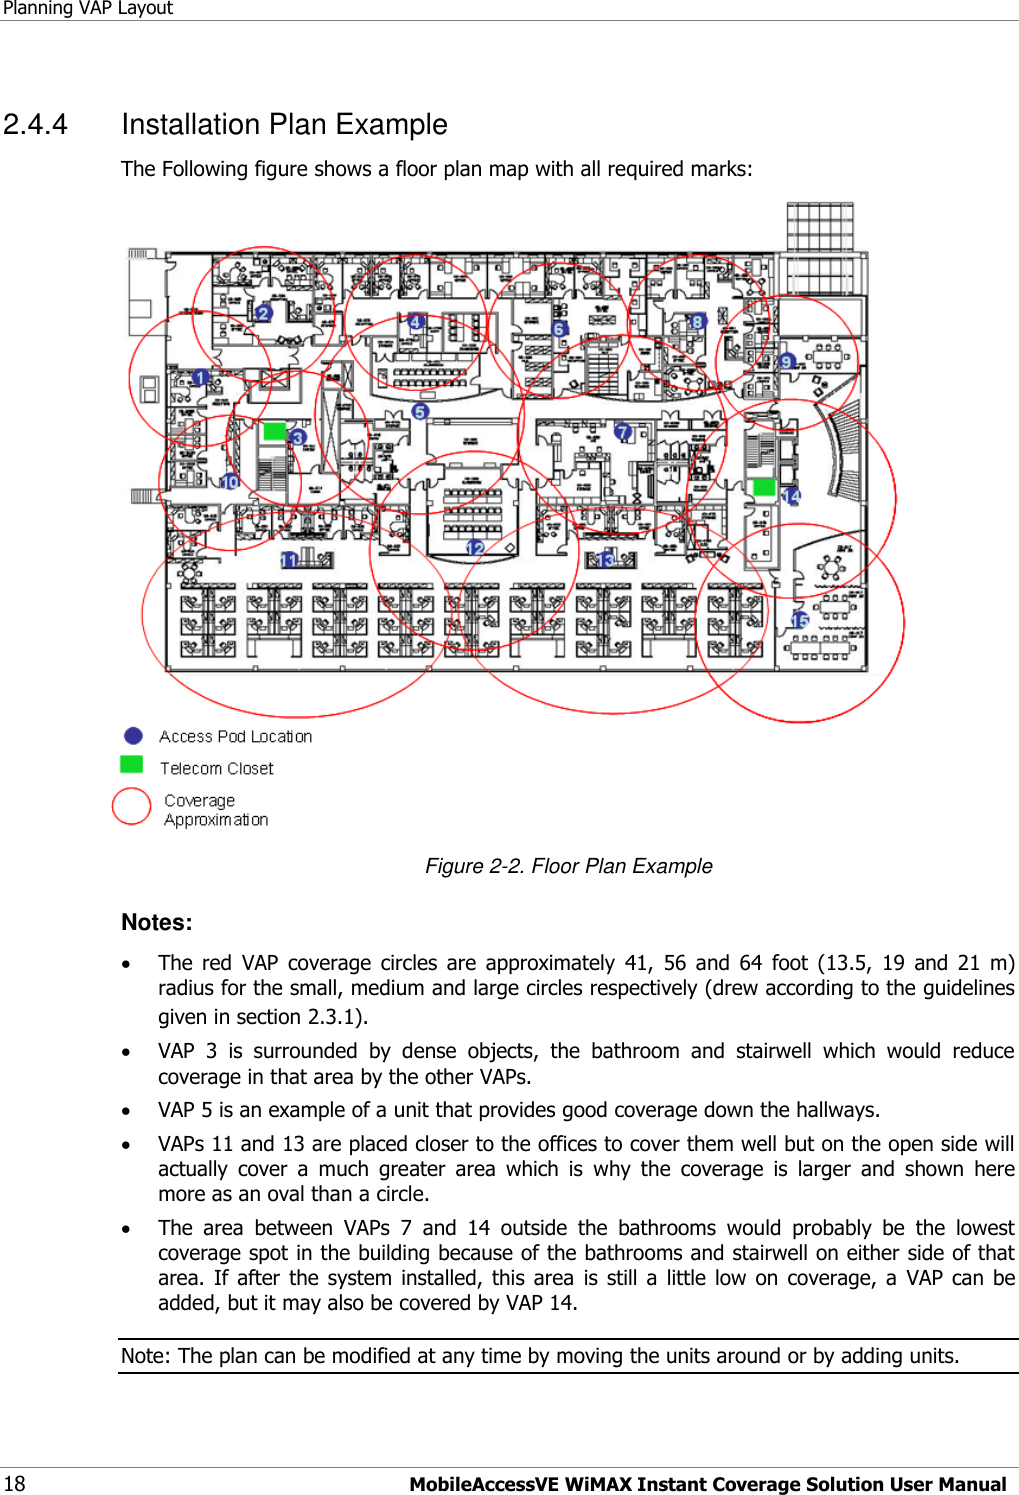 Planning VAP Layout 18 MobileAccessVE WiMAX Instant Coverage Solution User Manual 2.4.4  Installation Plan Example The Following figure shows a floor plan map with all required marks:  Figure 2-2. Floor Plan Example Notes:  The  red  VAP  coverage  circles  are  approximately  41,  56  and  64 foot  (13.5,  19  and  21  m)  radius for the small, medium and large circles respectively (drew according to the guidelines given in section 2.3.1).  VAP  3  is  surrounded  by  dense  objects,  the  bathroom  and  stairwell  which  would  reduce coverage in that area by the other VAPs.  VAP 5 is an example of a unit that provides good coverage down the hallways.  VAPs 11 and 13 are placed closer to the offices to cover them well but on the open side will actually  cover  a  much  greater  area  which  is  why  the  coverage  is  larger  and  shown  here more as an oval than a circle.  The  area  between  VAPs  7  and  14  outside  the  bathrooms  would  probably  be  the  lowest coverage spot in the building because of the bathrooms and stairwell on either side of that area.  If  after  the  system  installed,  this  area  is  still  a  little  low on  coverage,  a  VAP  can  be added, but it may also be covered by VAP 14. Note: The plan can be modified at any time by moving the units around or by adding units. 